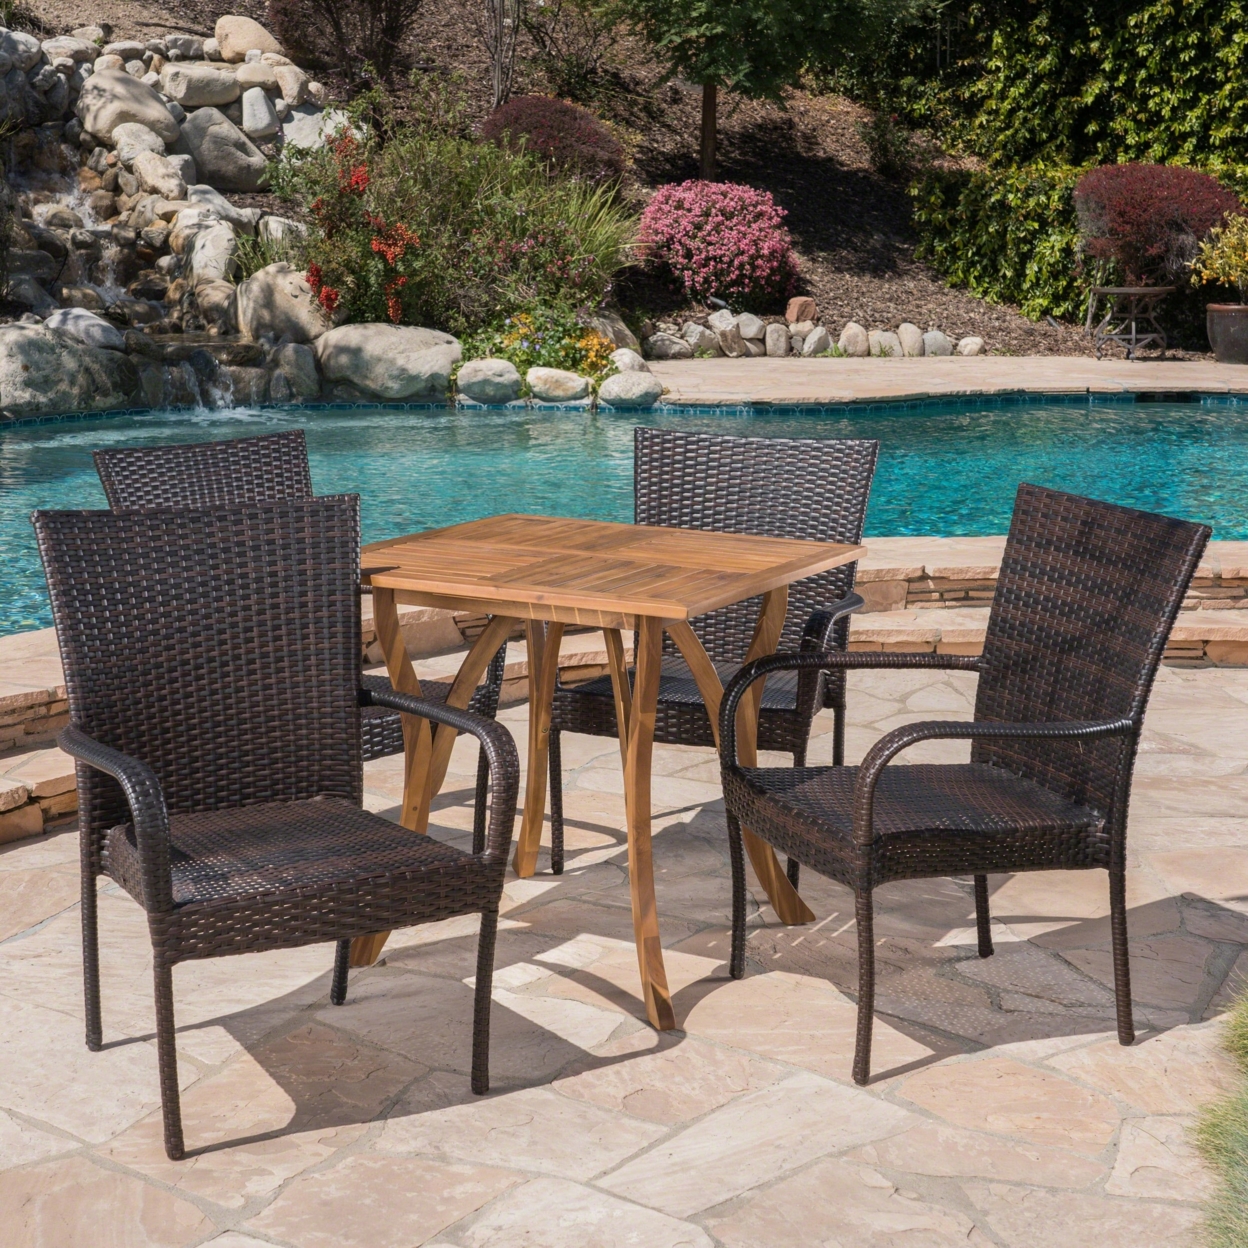 Benson Outdoor 5 Piece Acacia Wood/ Wicker Dining Set, Teak Finish And Multibrown